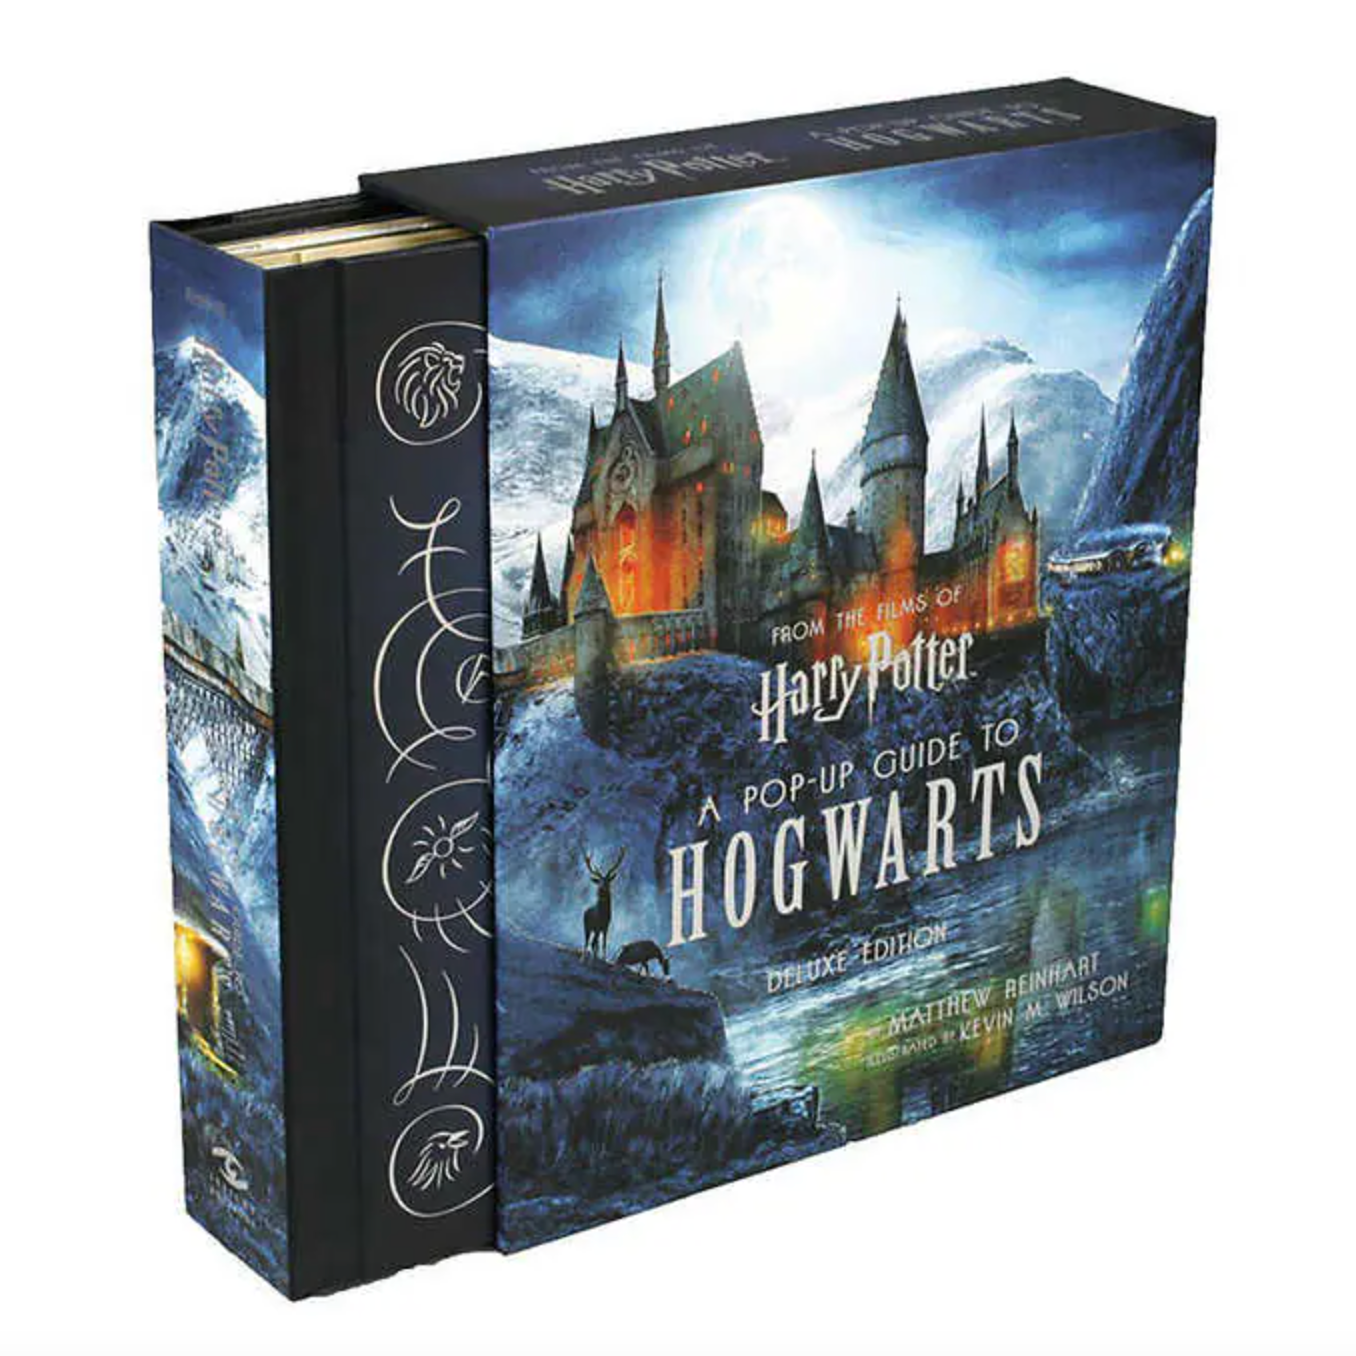 Harry Potter: A Pop-Up Guide to Hogwarts – Limited Edition